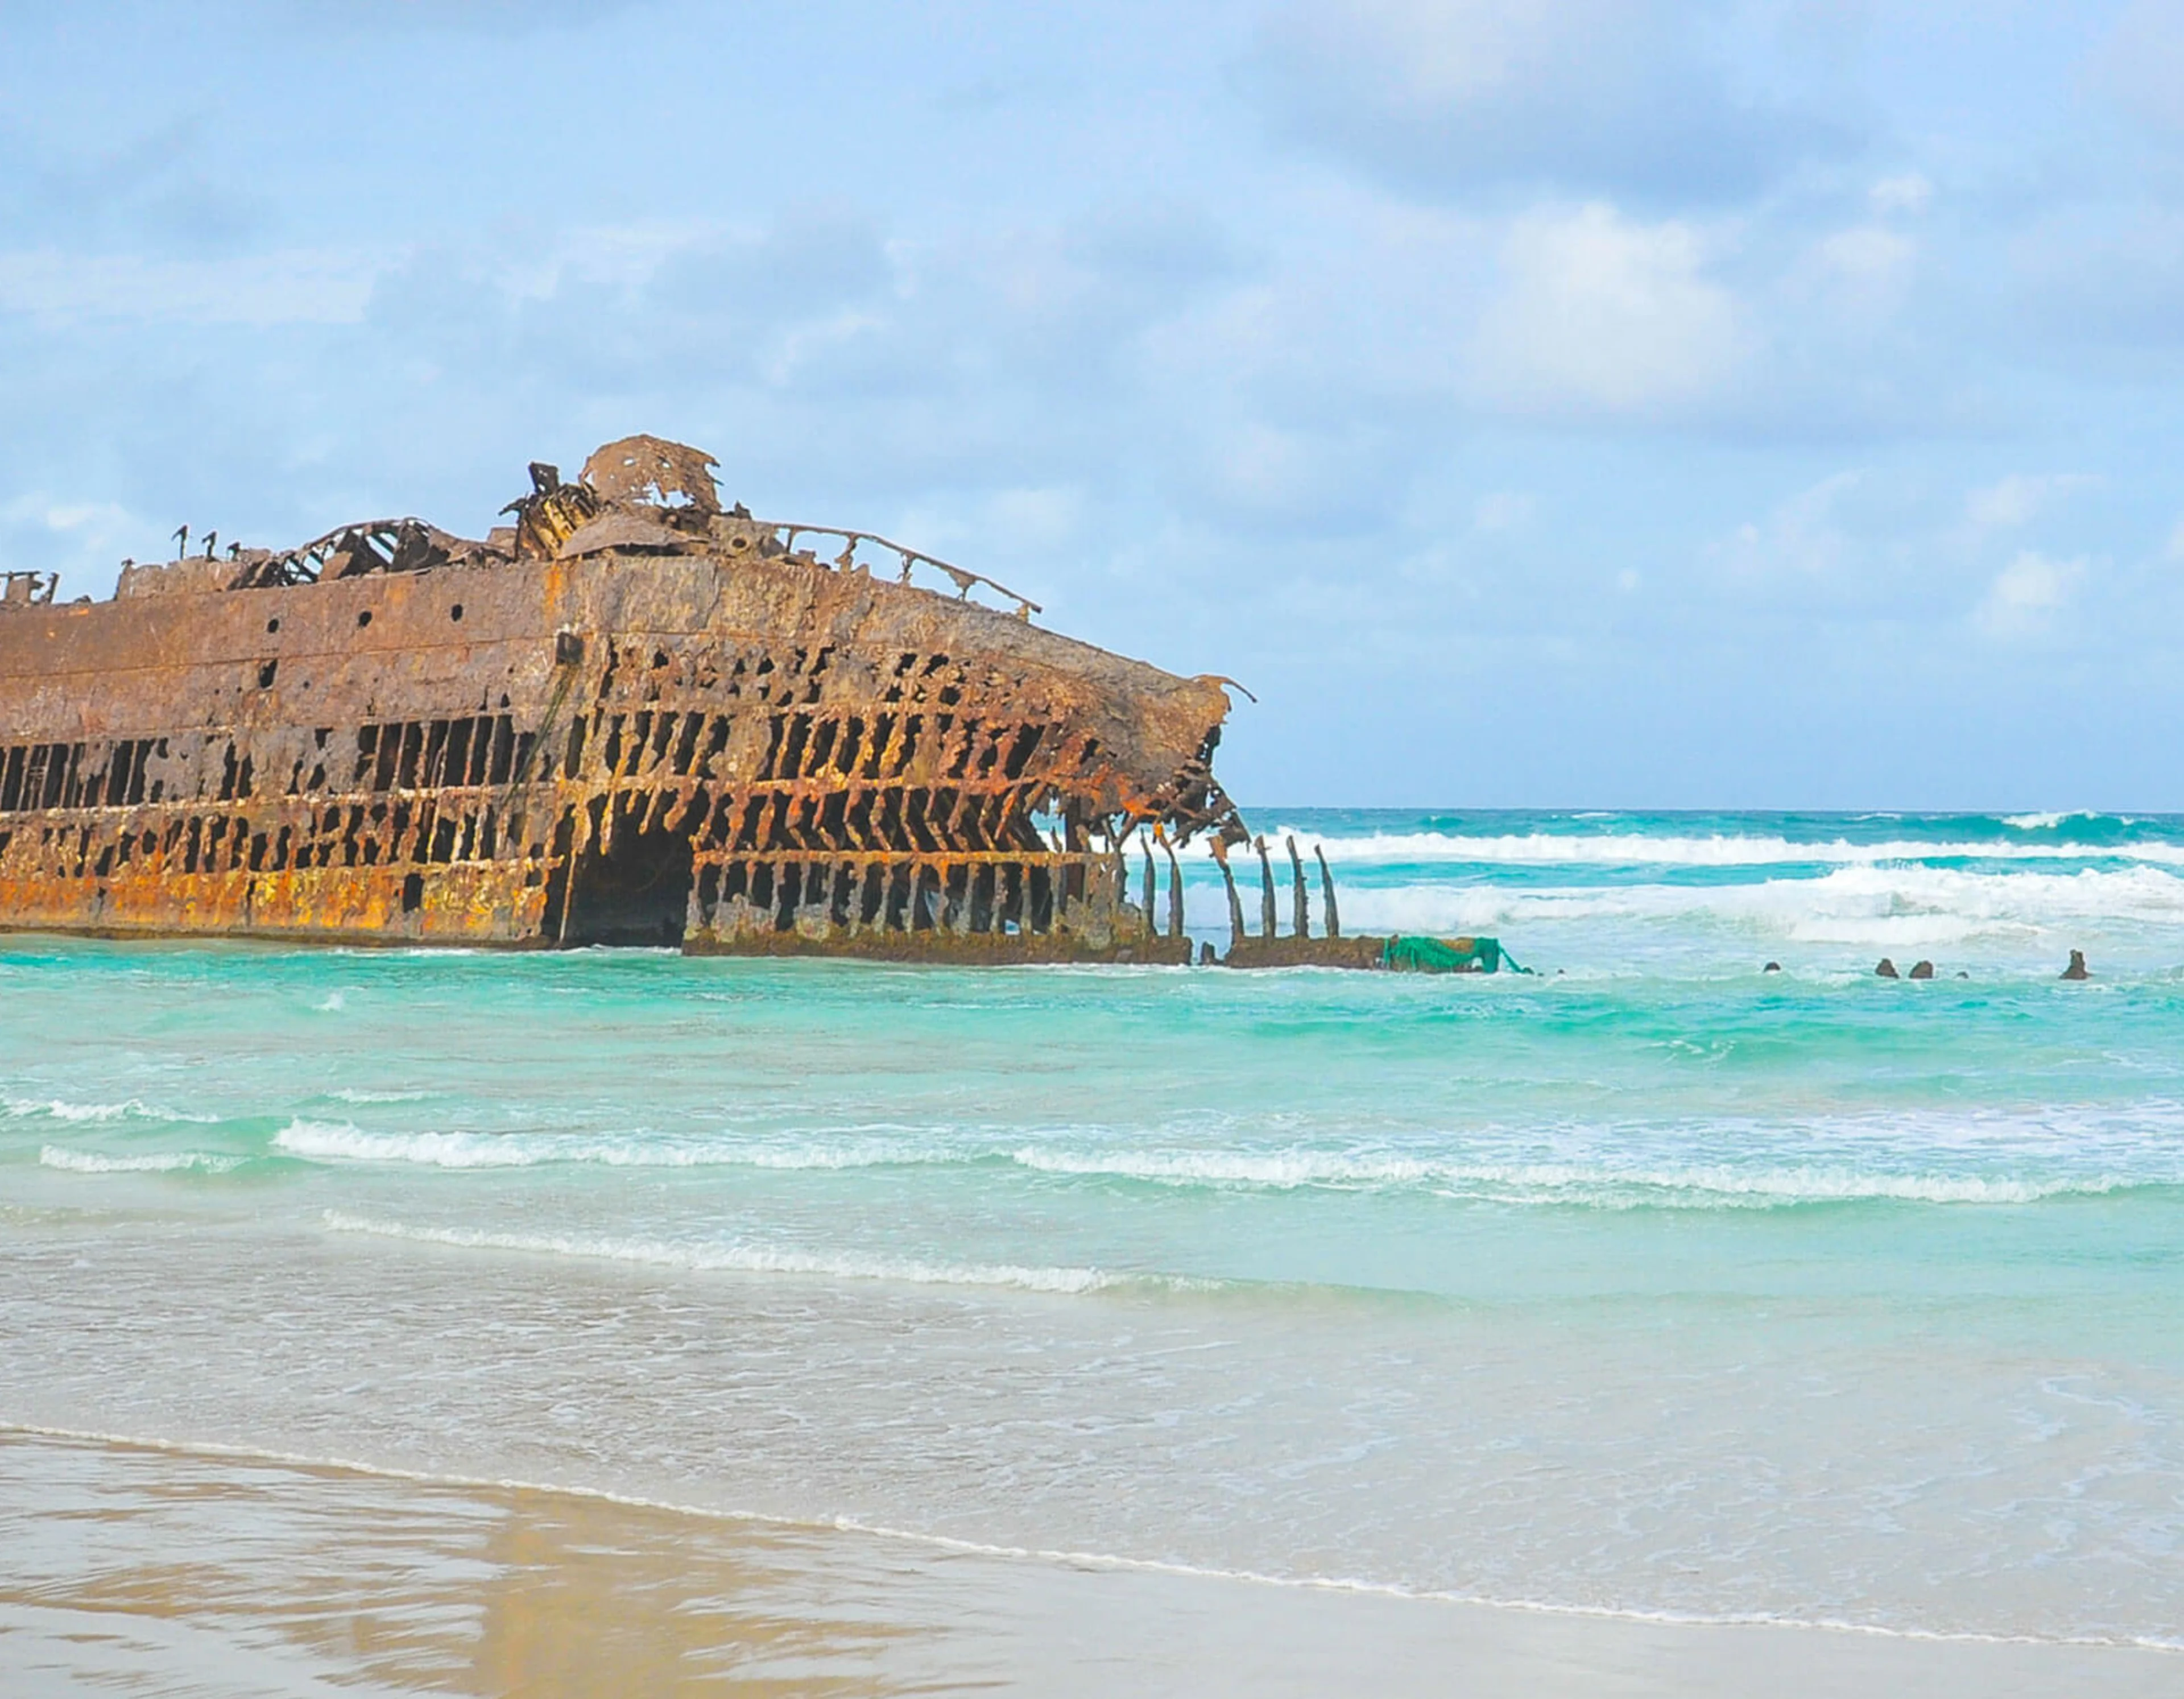 A large shipwreck is located at the water's edge on a beach. the sea is bright blue 